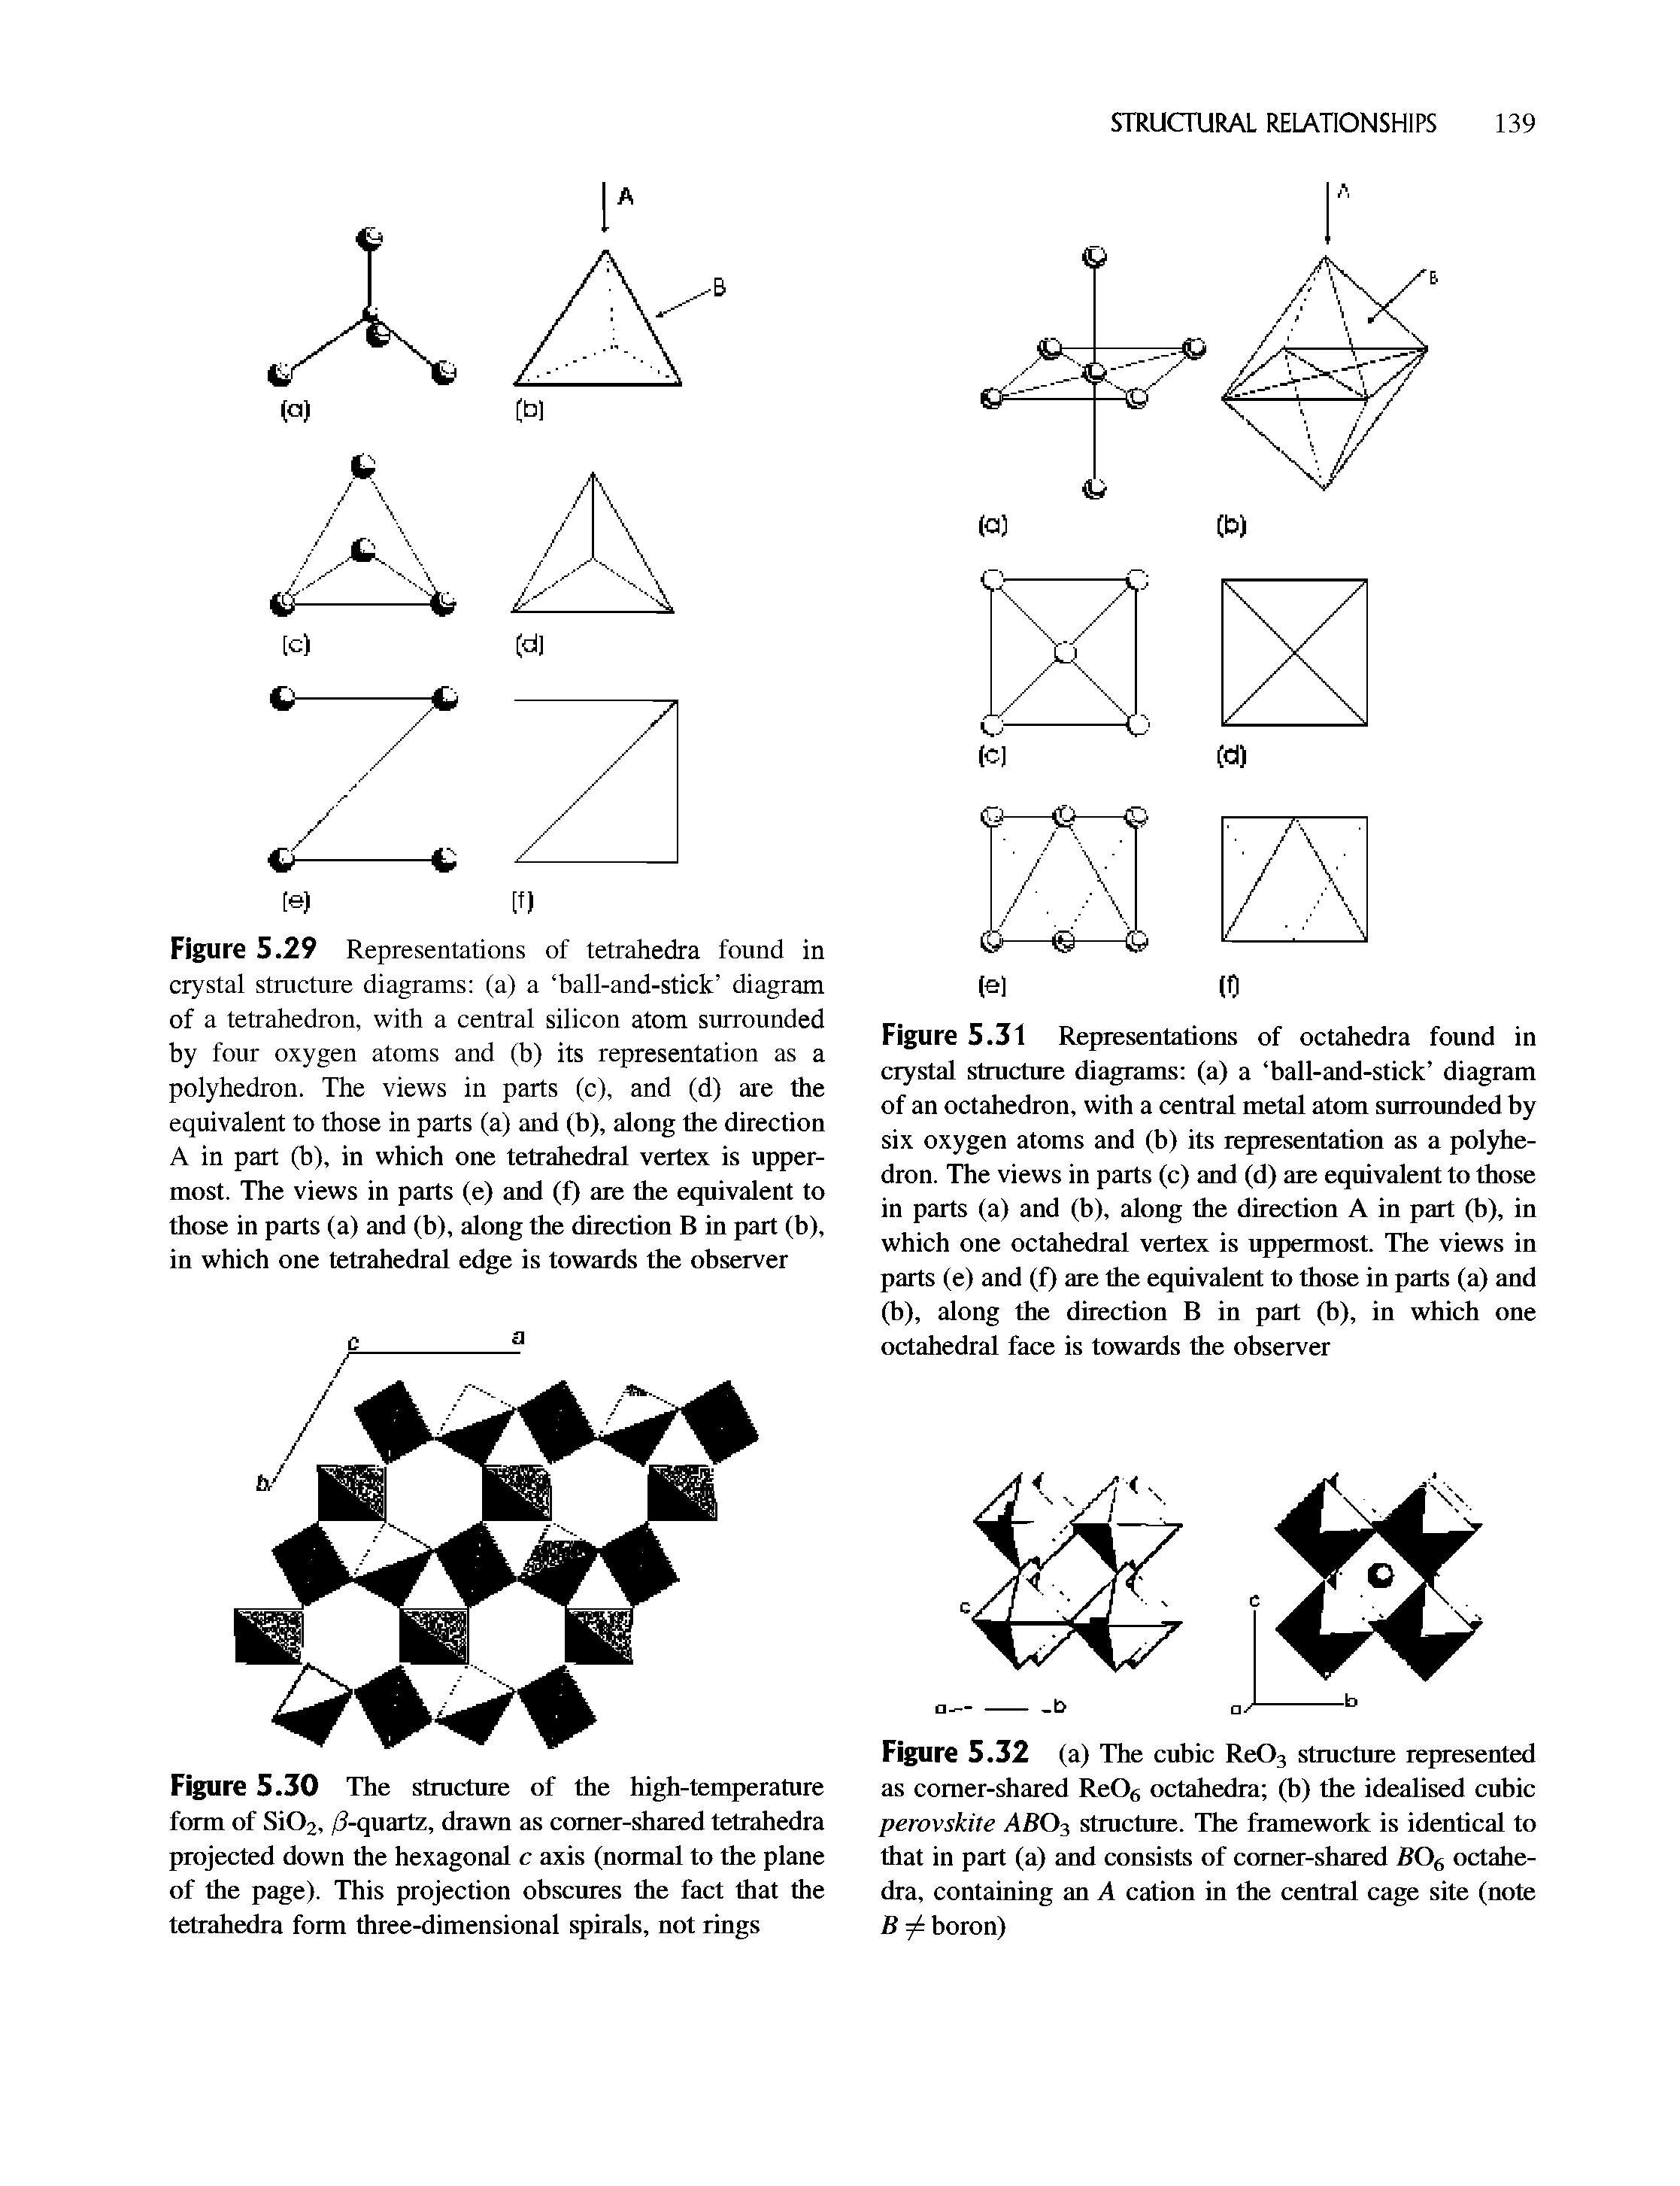 Figure 5.29 Representations of tetrahedra found in crystal structure diagrams (a) a ball-and-stick diagram of a tetrahedron, with a central silicon atom surrounded by four oxygen atoms and (b) its representation as a polyhedron. The views in parts (c), and (d) are the equivalent to those in parts (a) and (b), along the direction A in part (b), in which one tetrahedral vertex is uppermost. The views in parts (e) and (f) are the equivalent to those in parts (a) and (b), along the direction B in part (b), in which one tetrahedral edge is towards the observer...